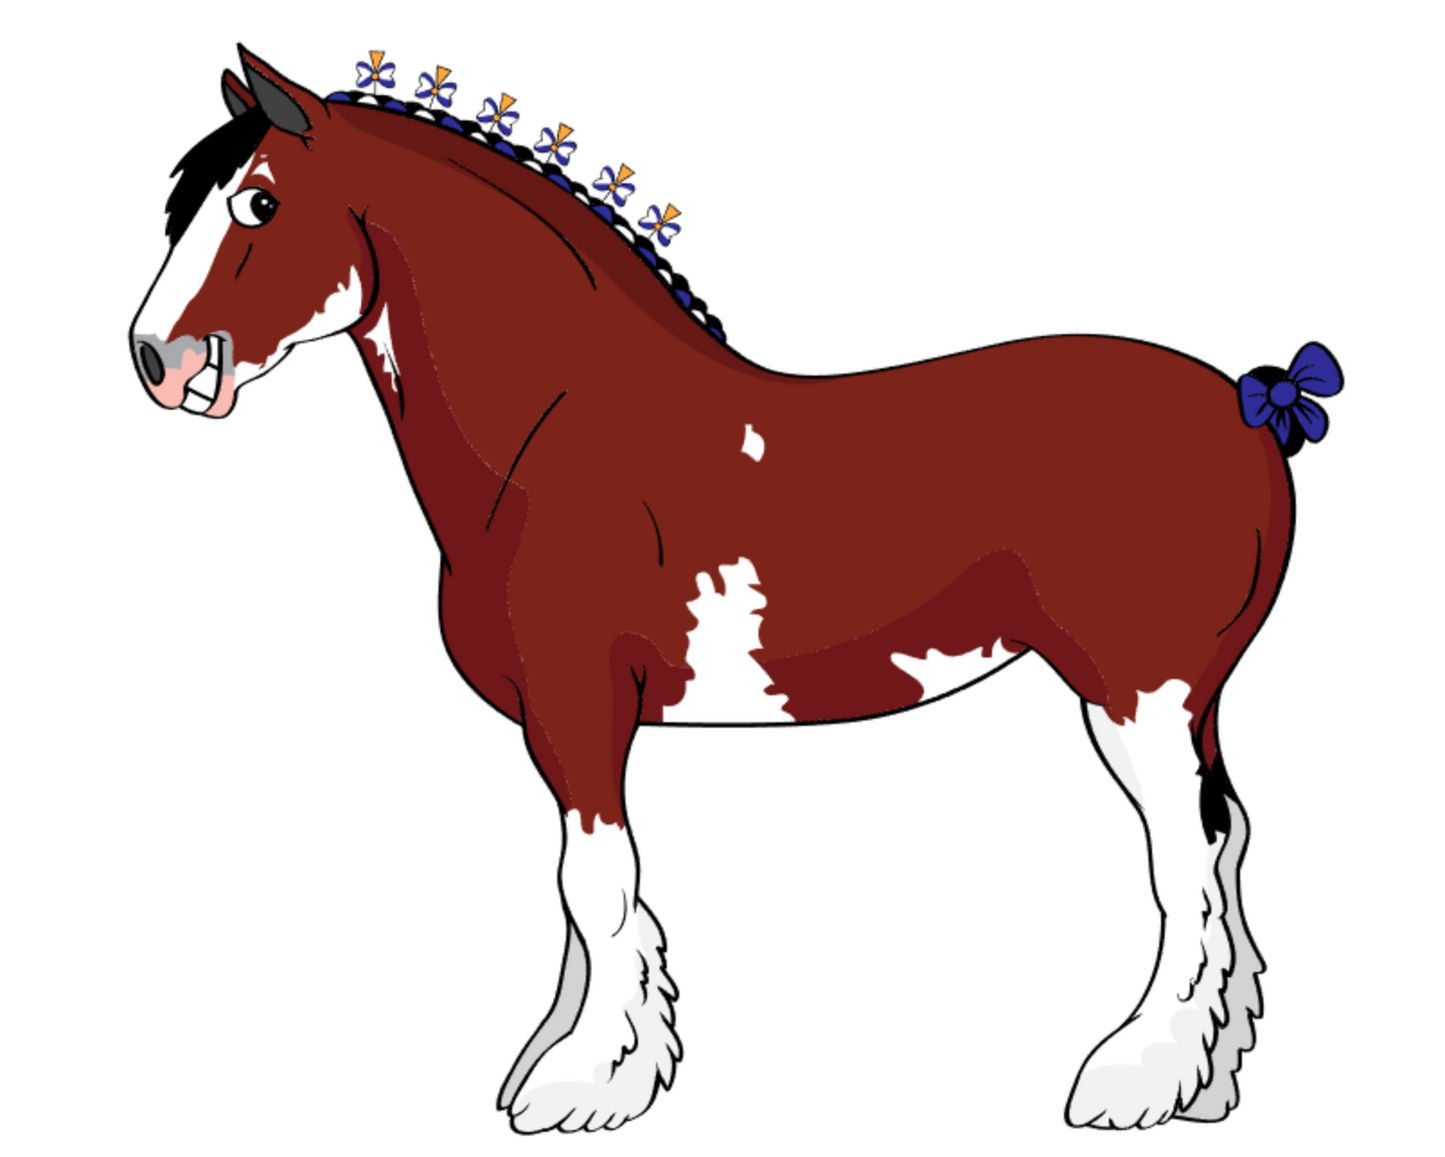 SANDY ACRES CLYDESDALES - Kids Paint Kits